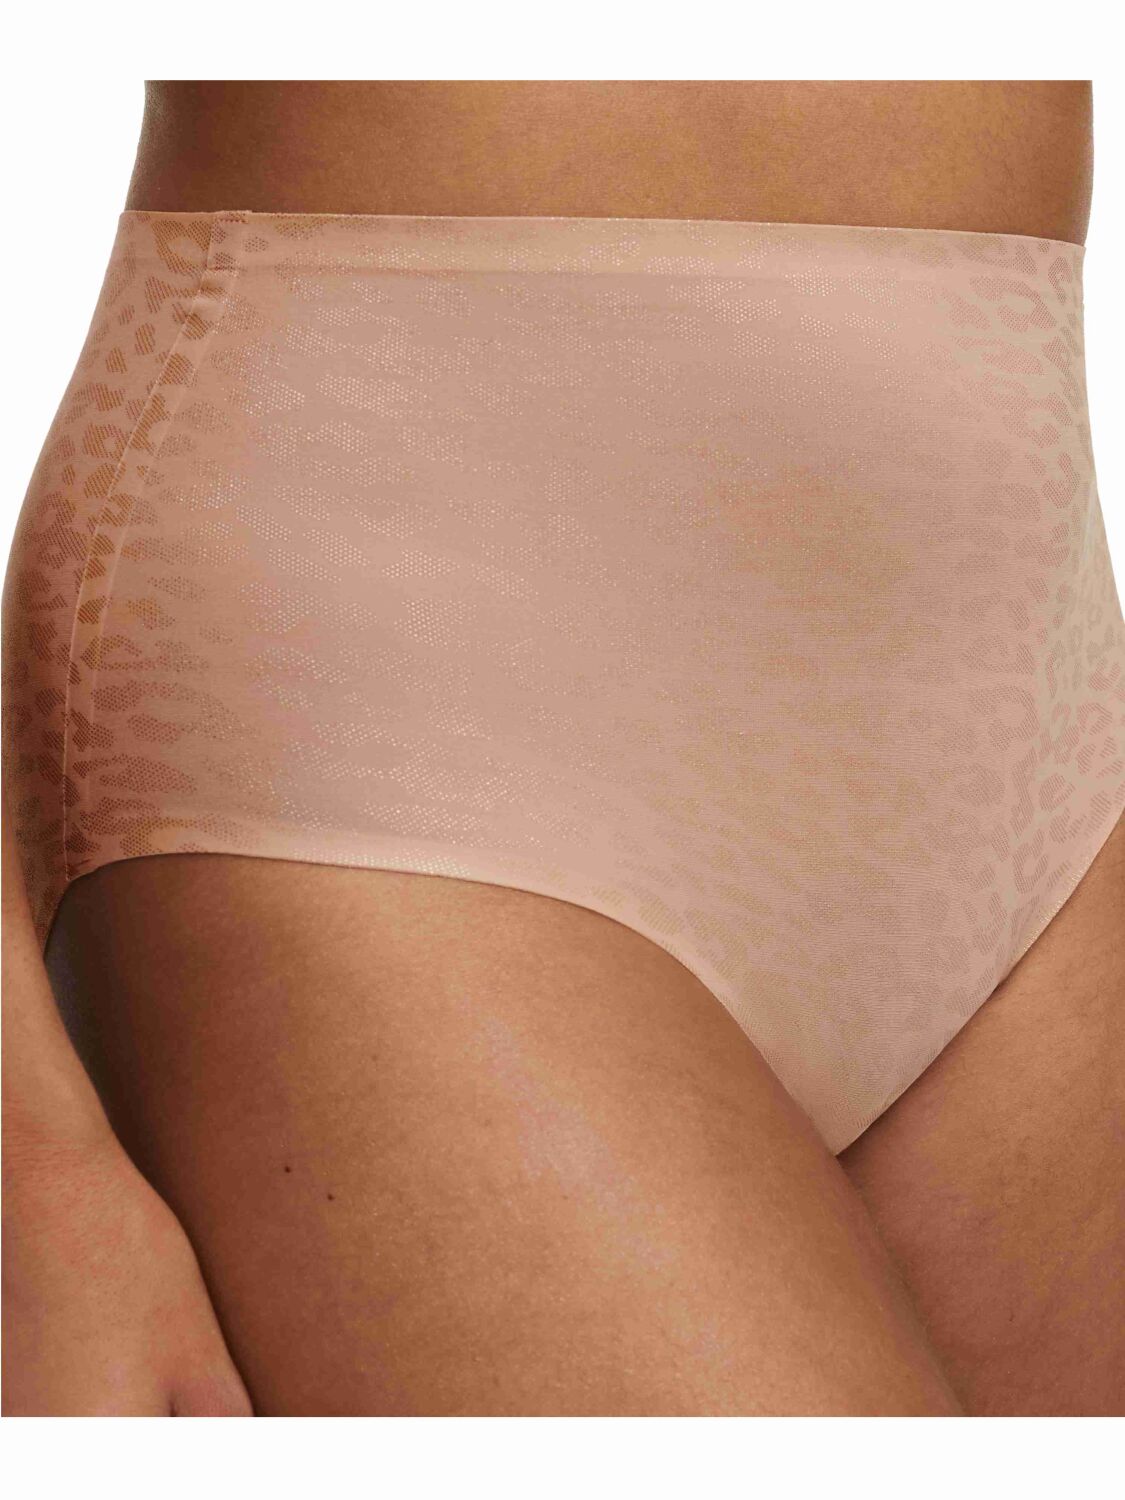 Chantelle Taillenslip ONE SIZE SoftStretch Farbe Leo Shimmer Print